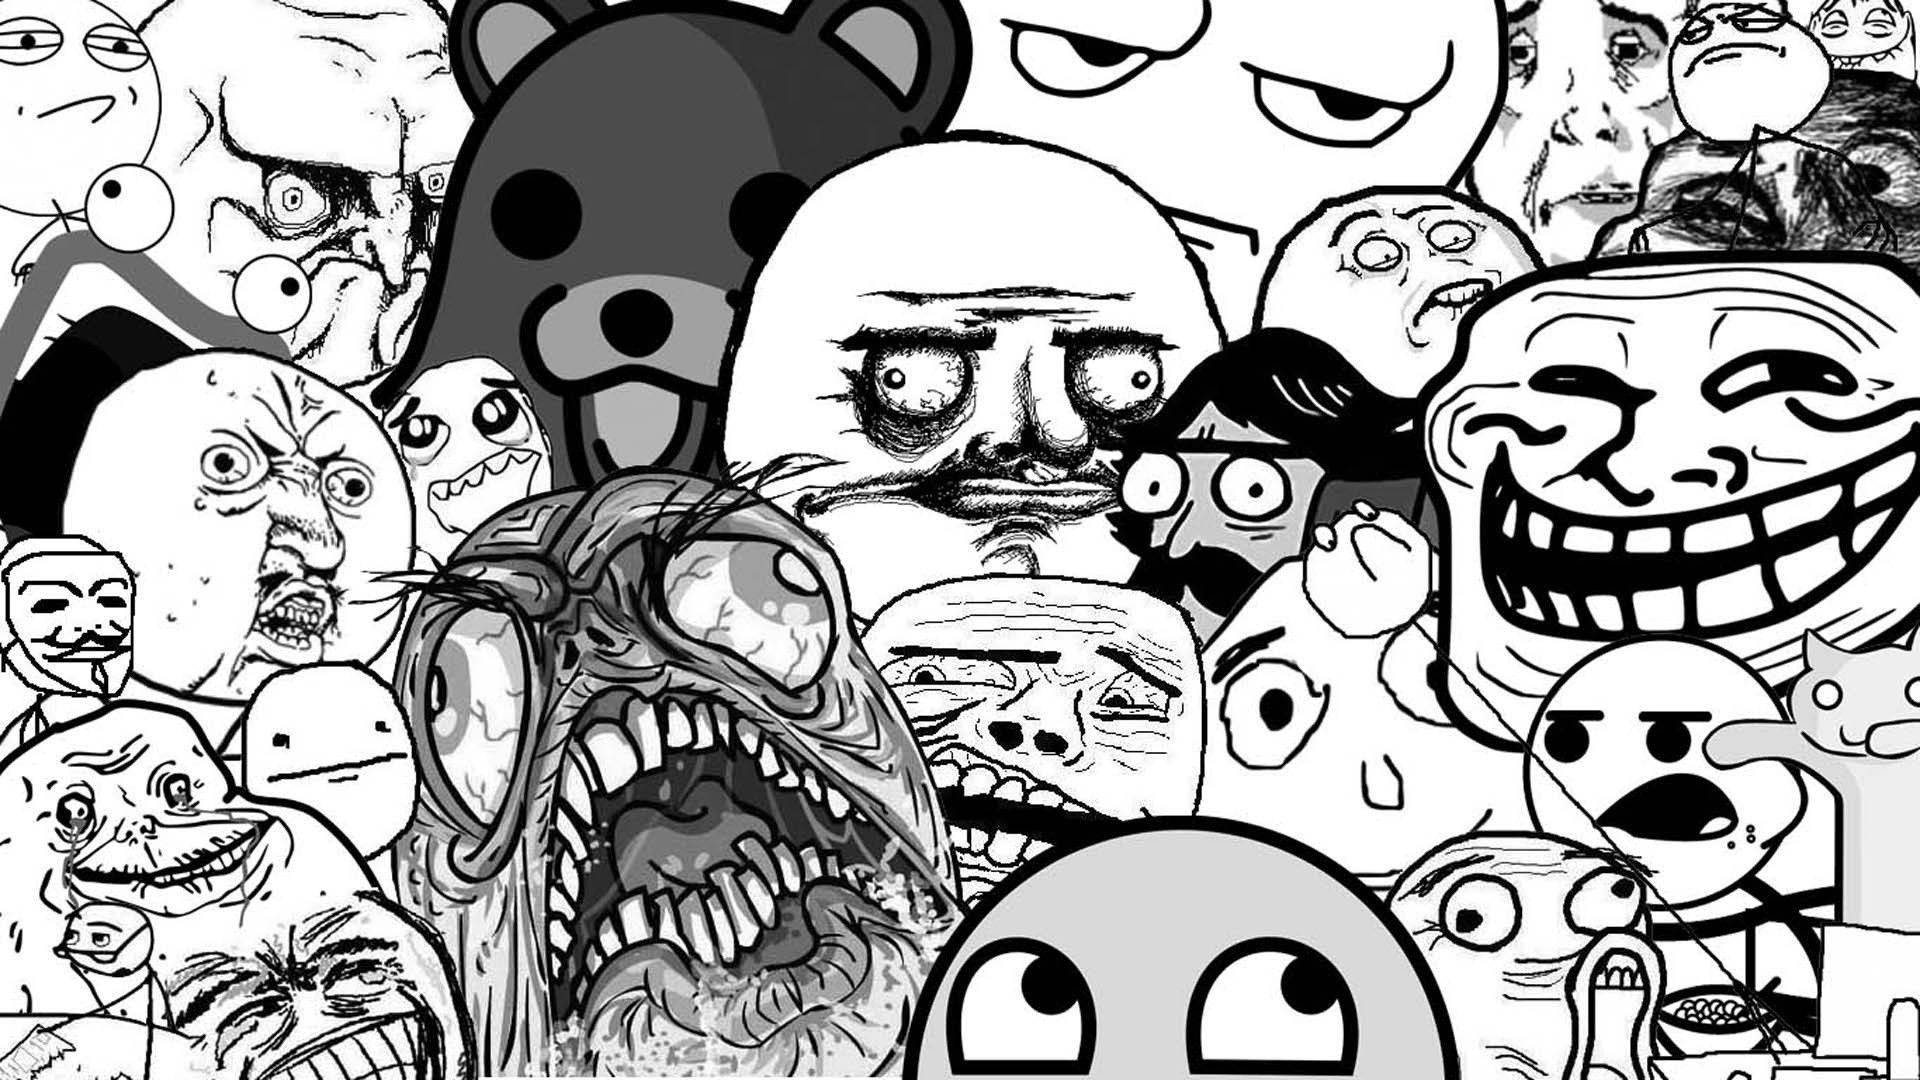 A Black And White Image Of A Group Of Cartoon Faces Wallpaper